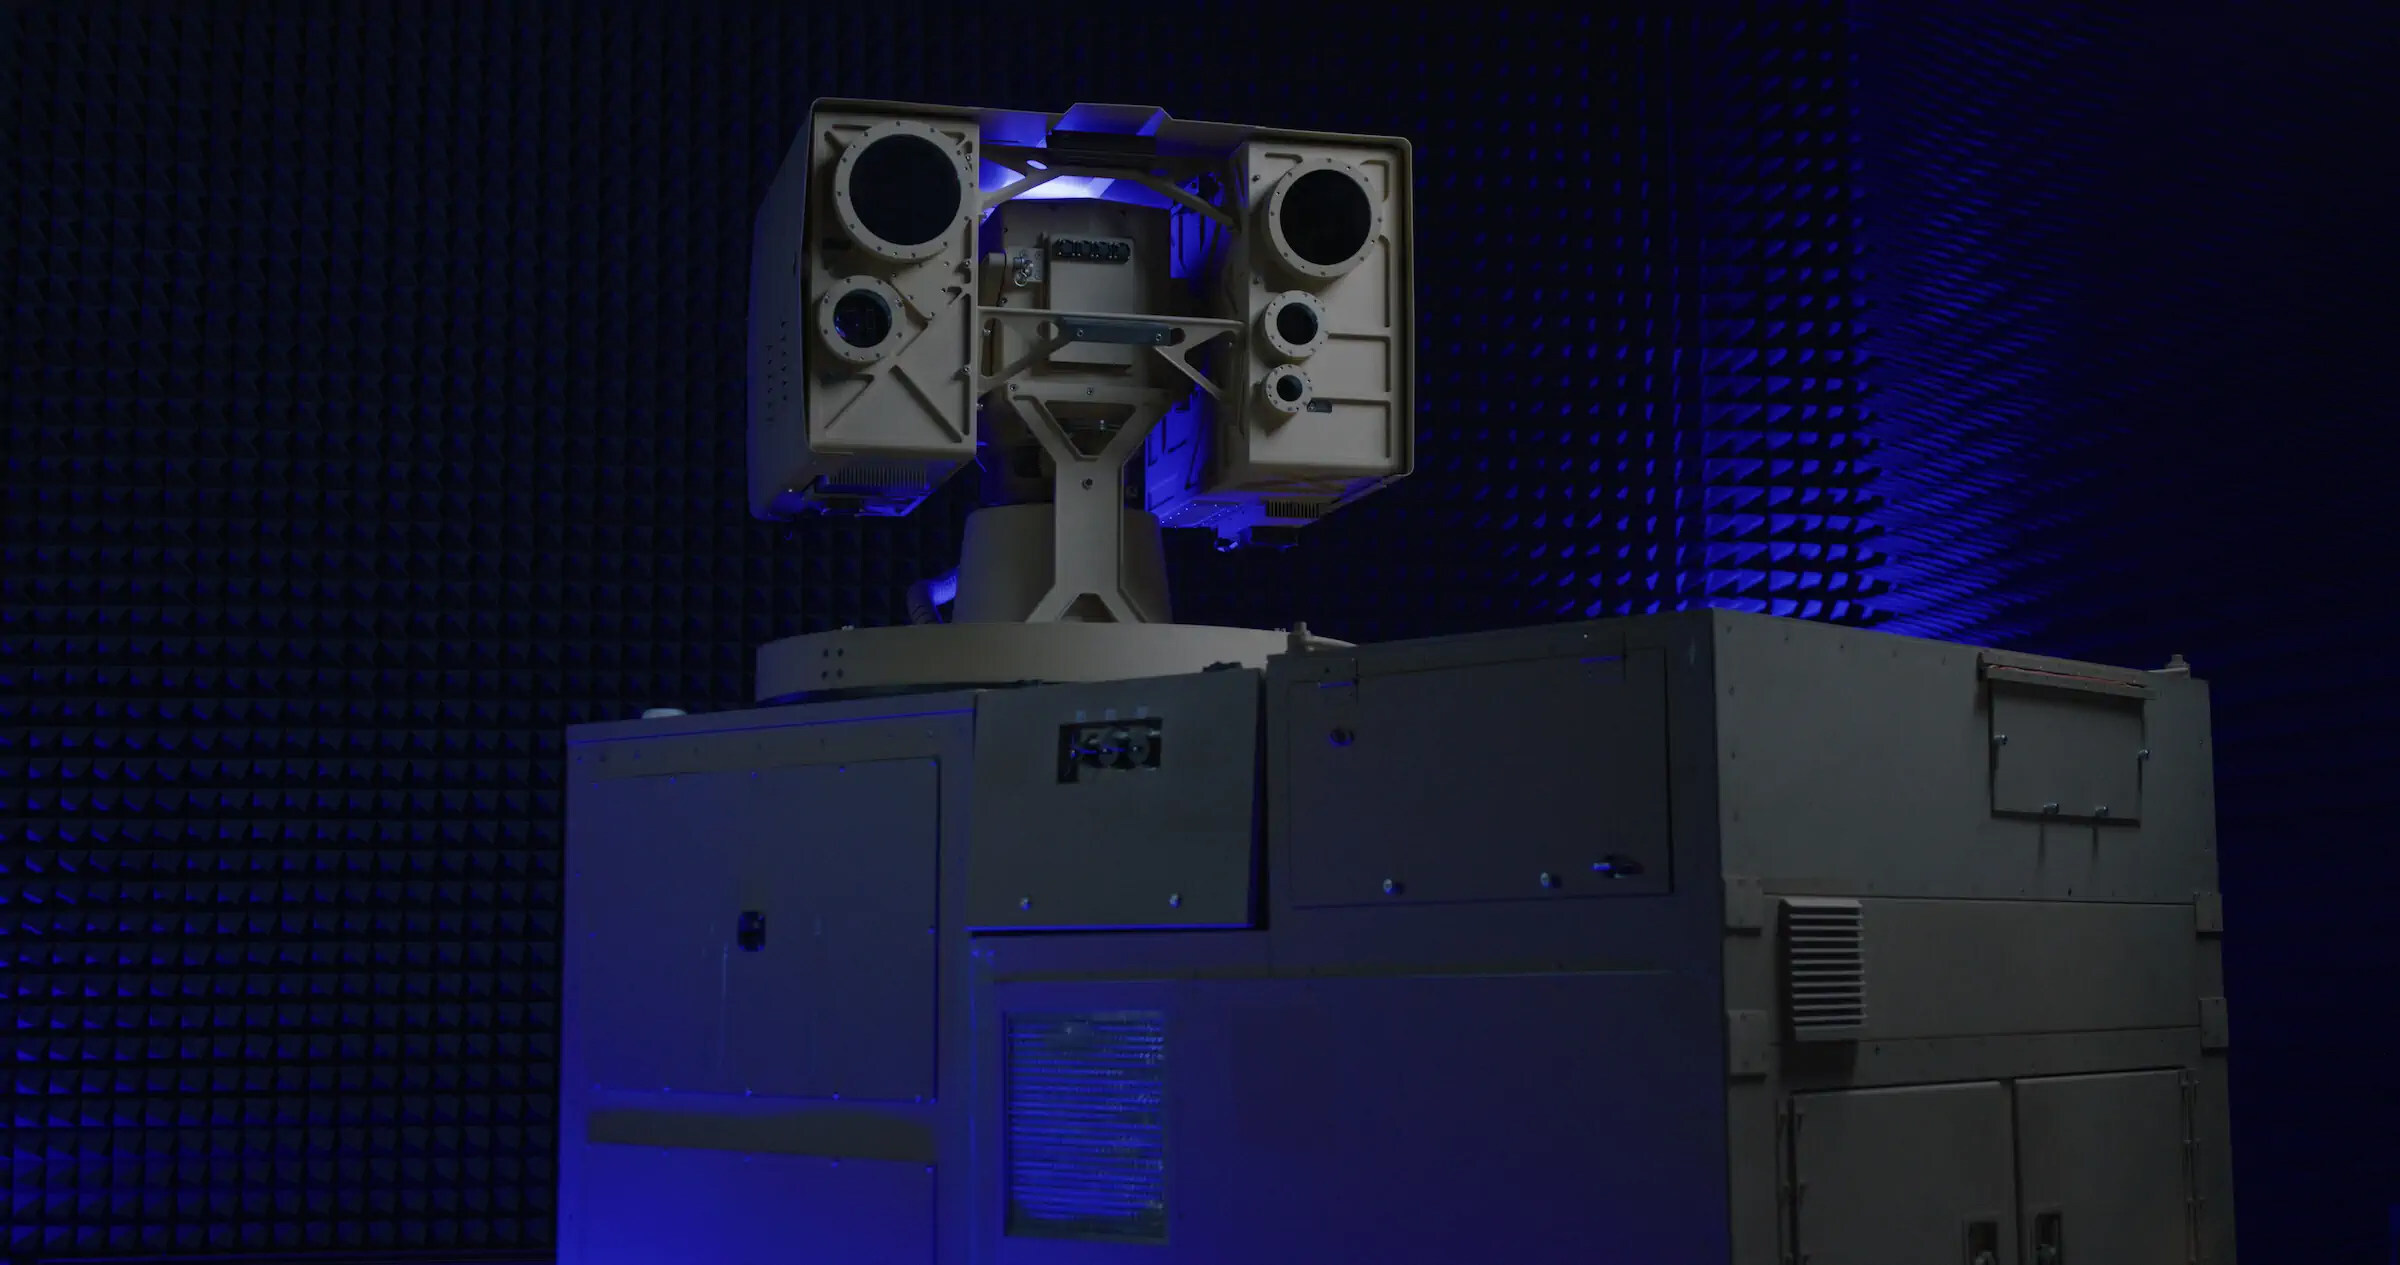 BlueHalo's LOCUST Laser Weapon System (LWS) enables and enhances the directed energy “kill chain”— tracking, identifying, and engaging a wide variety of targets with hard-kill High Energy Laser.